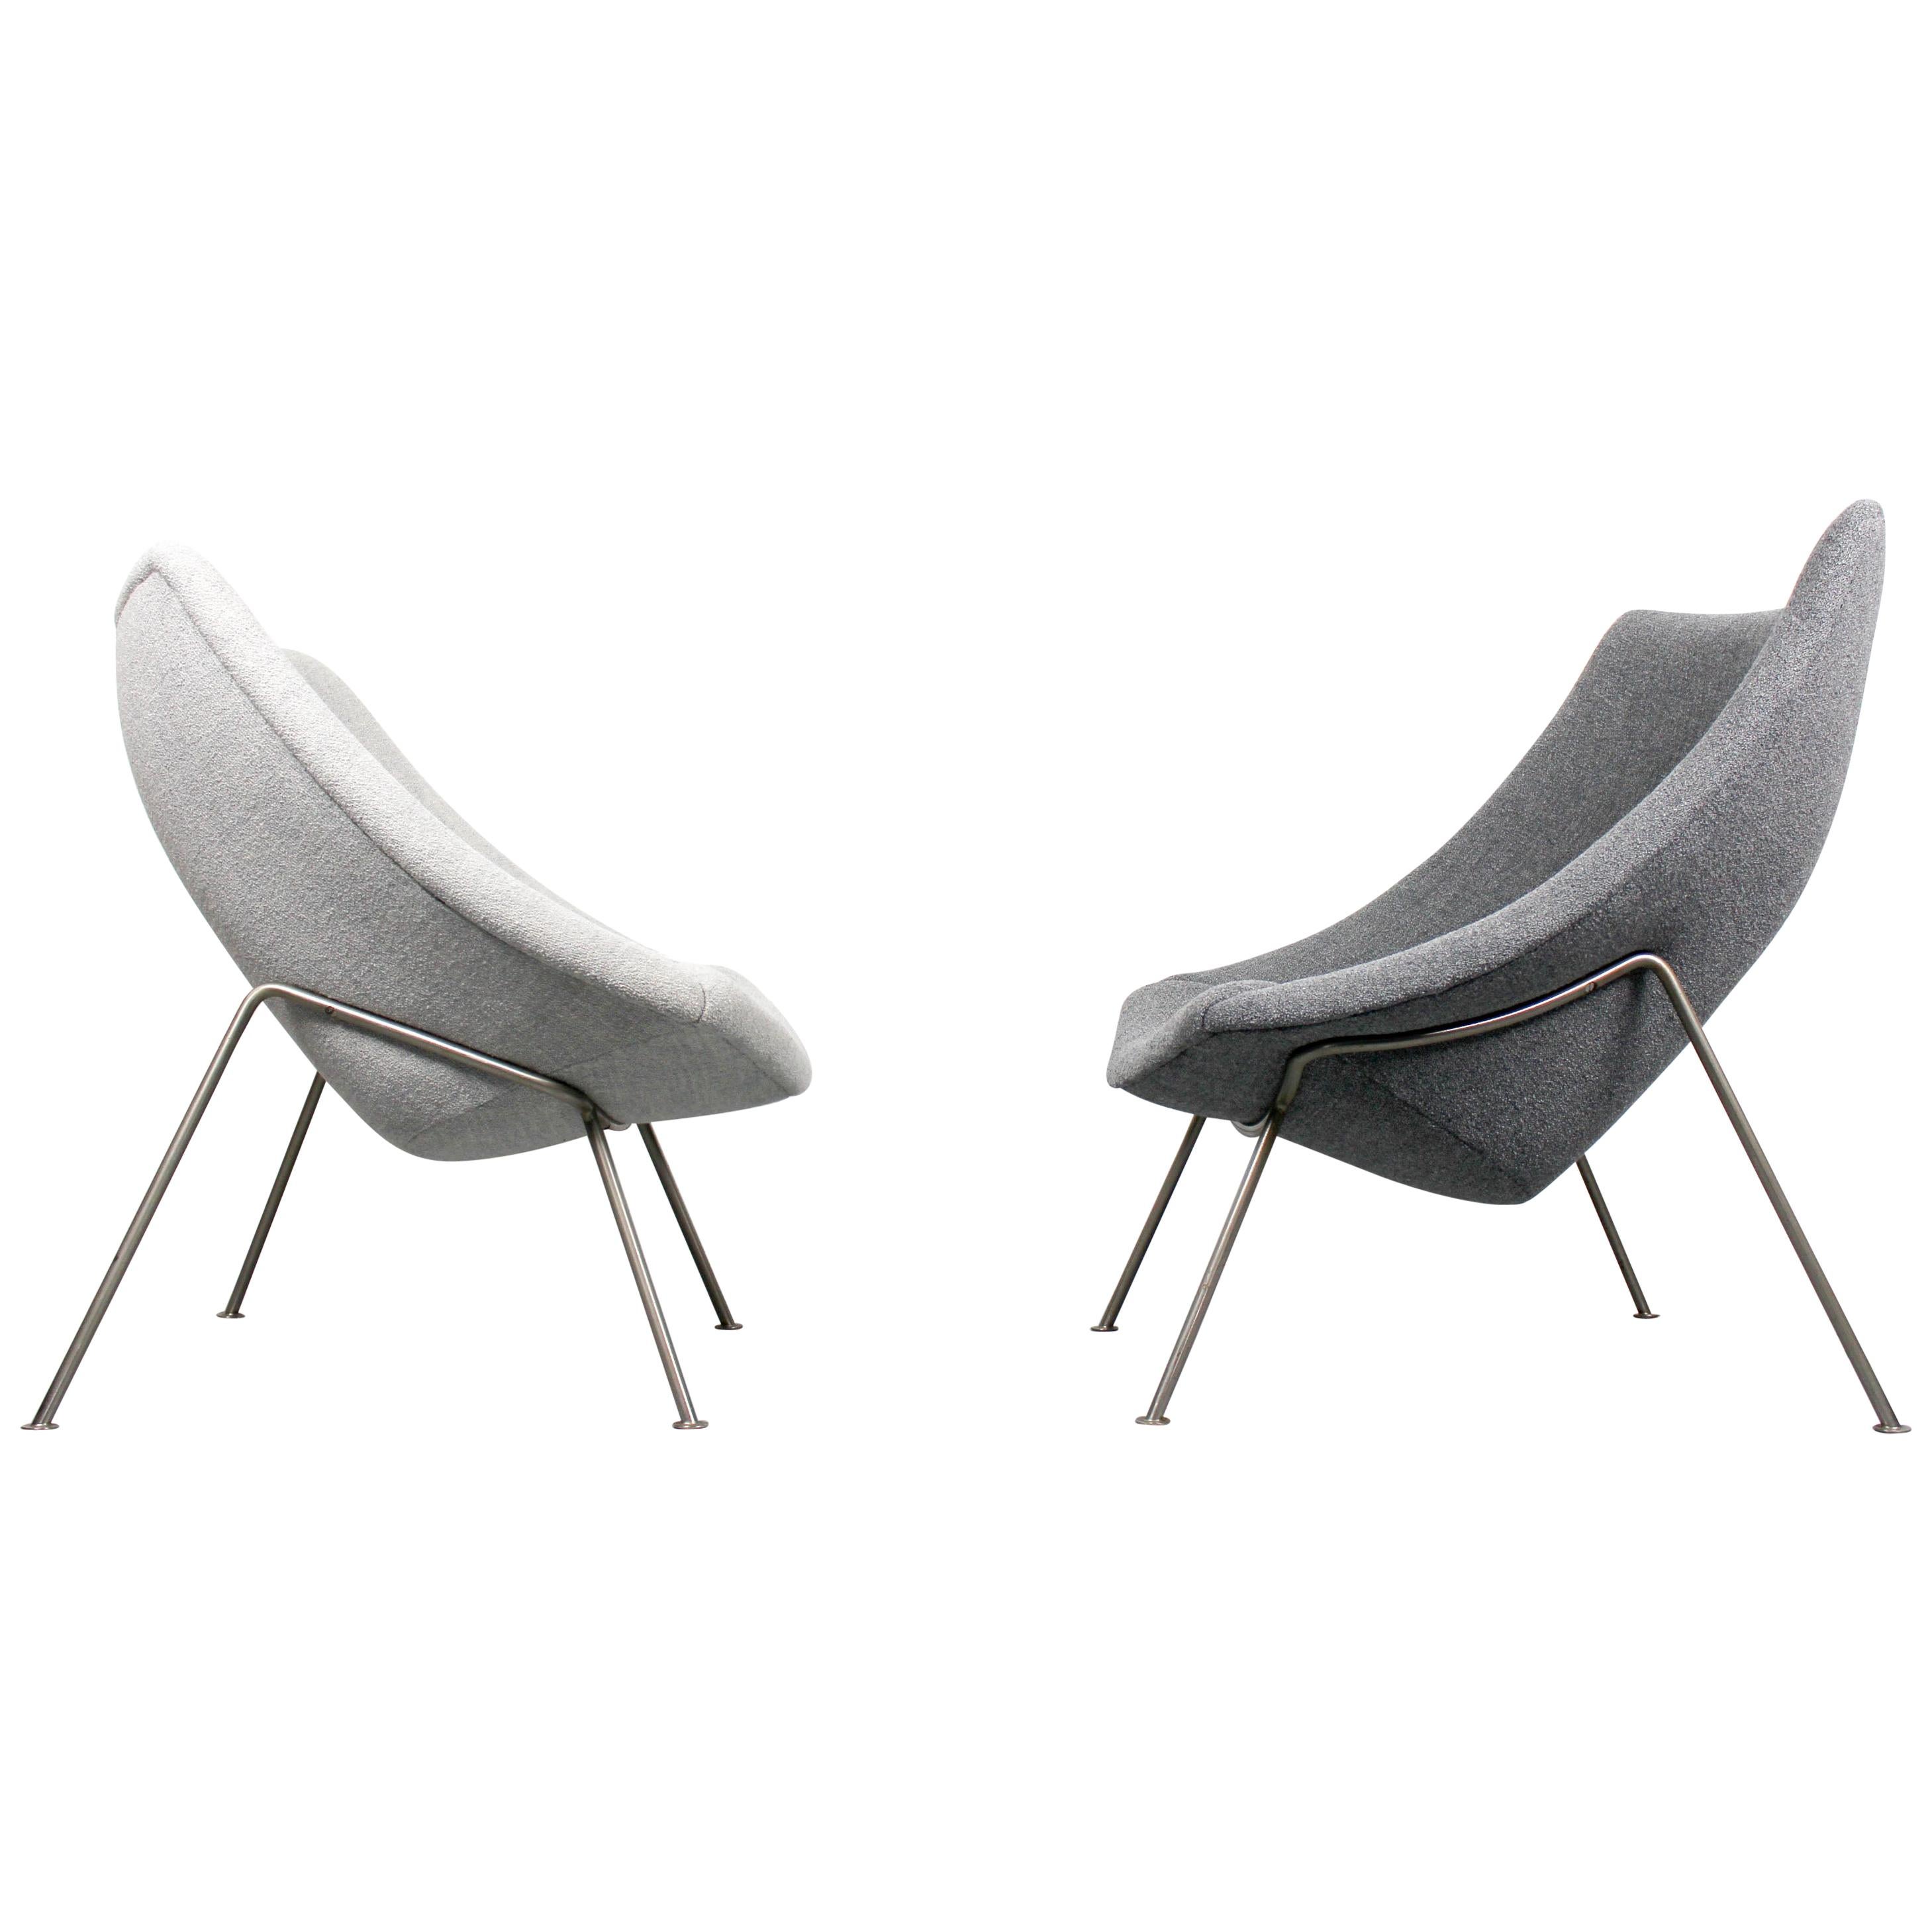 Vintage Pair of Oyster Chairs ‘Big & Little’ by Pierre Paulin, Artifort, 1960s